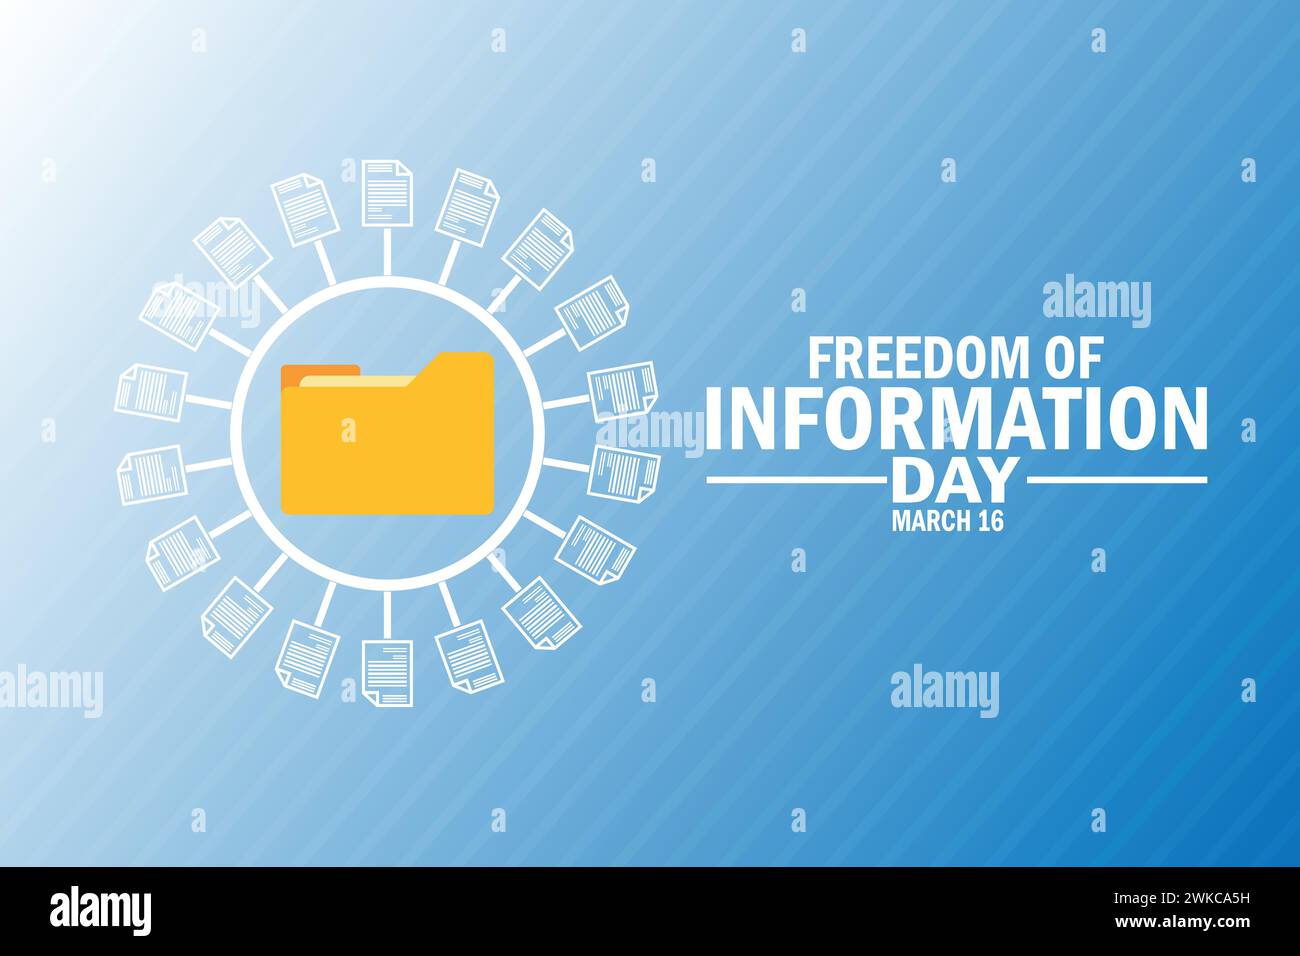 Freedom Of Information Day wallpaper with typography. Freedom Of Information Day, background Stock Vector